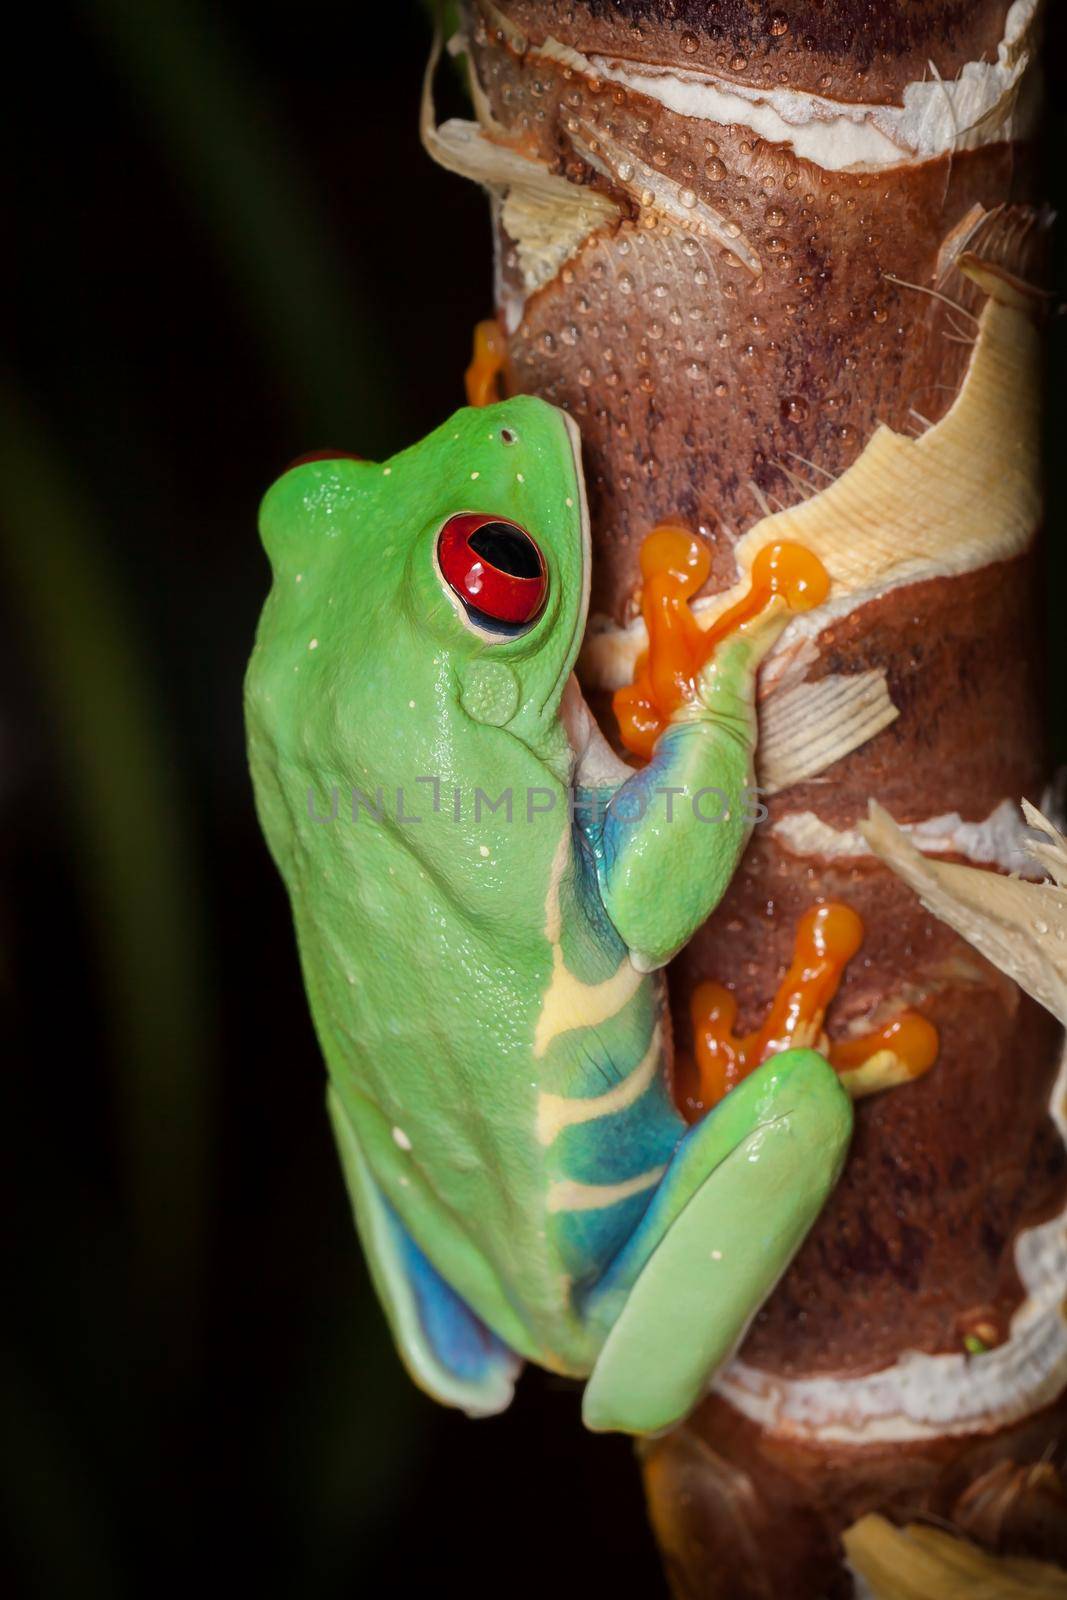 Red-eyed tree frog climbing on the plant stem by Lincikas